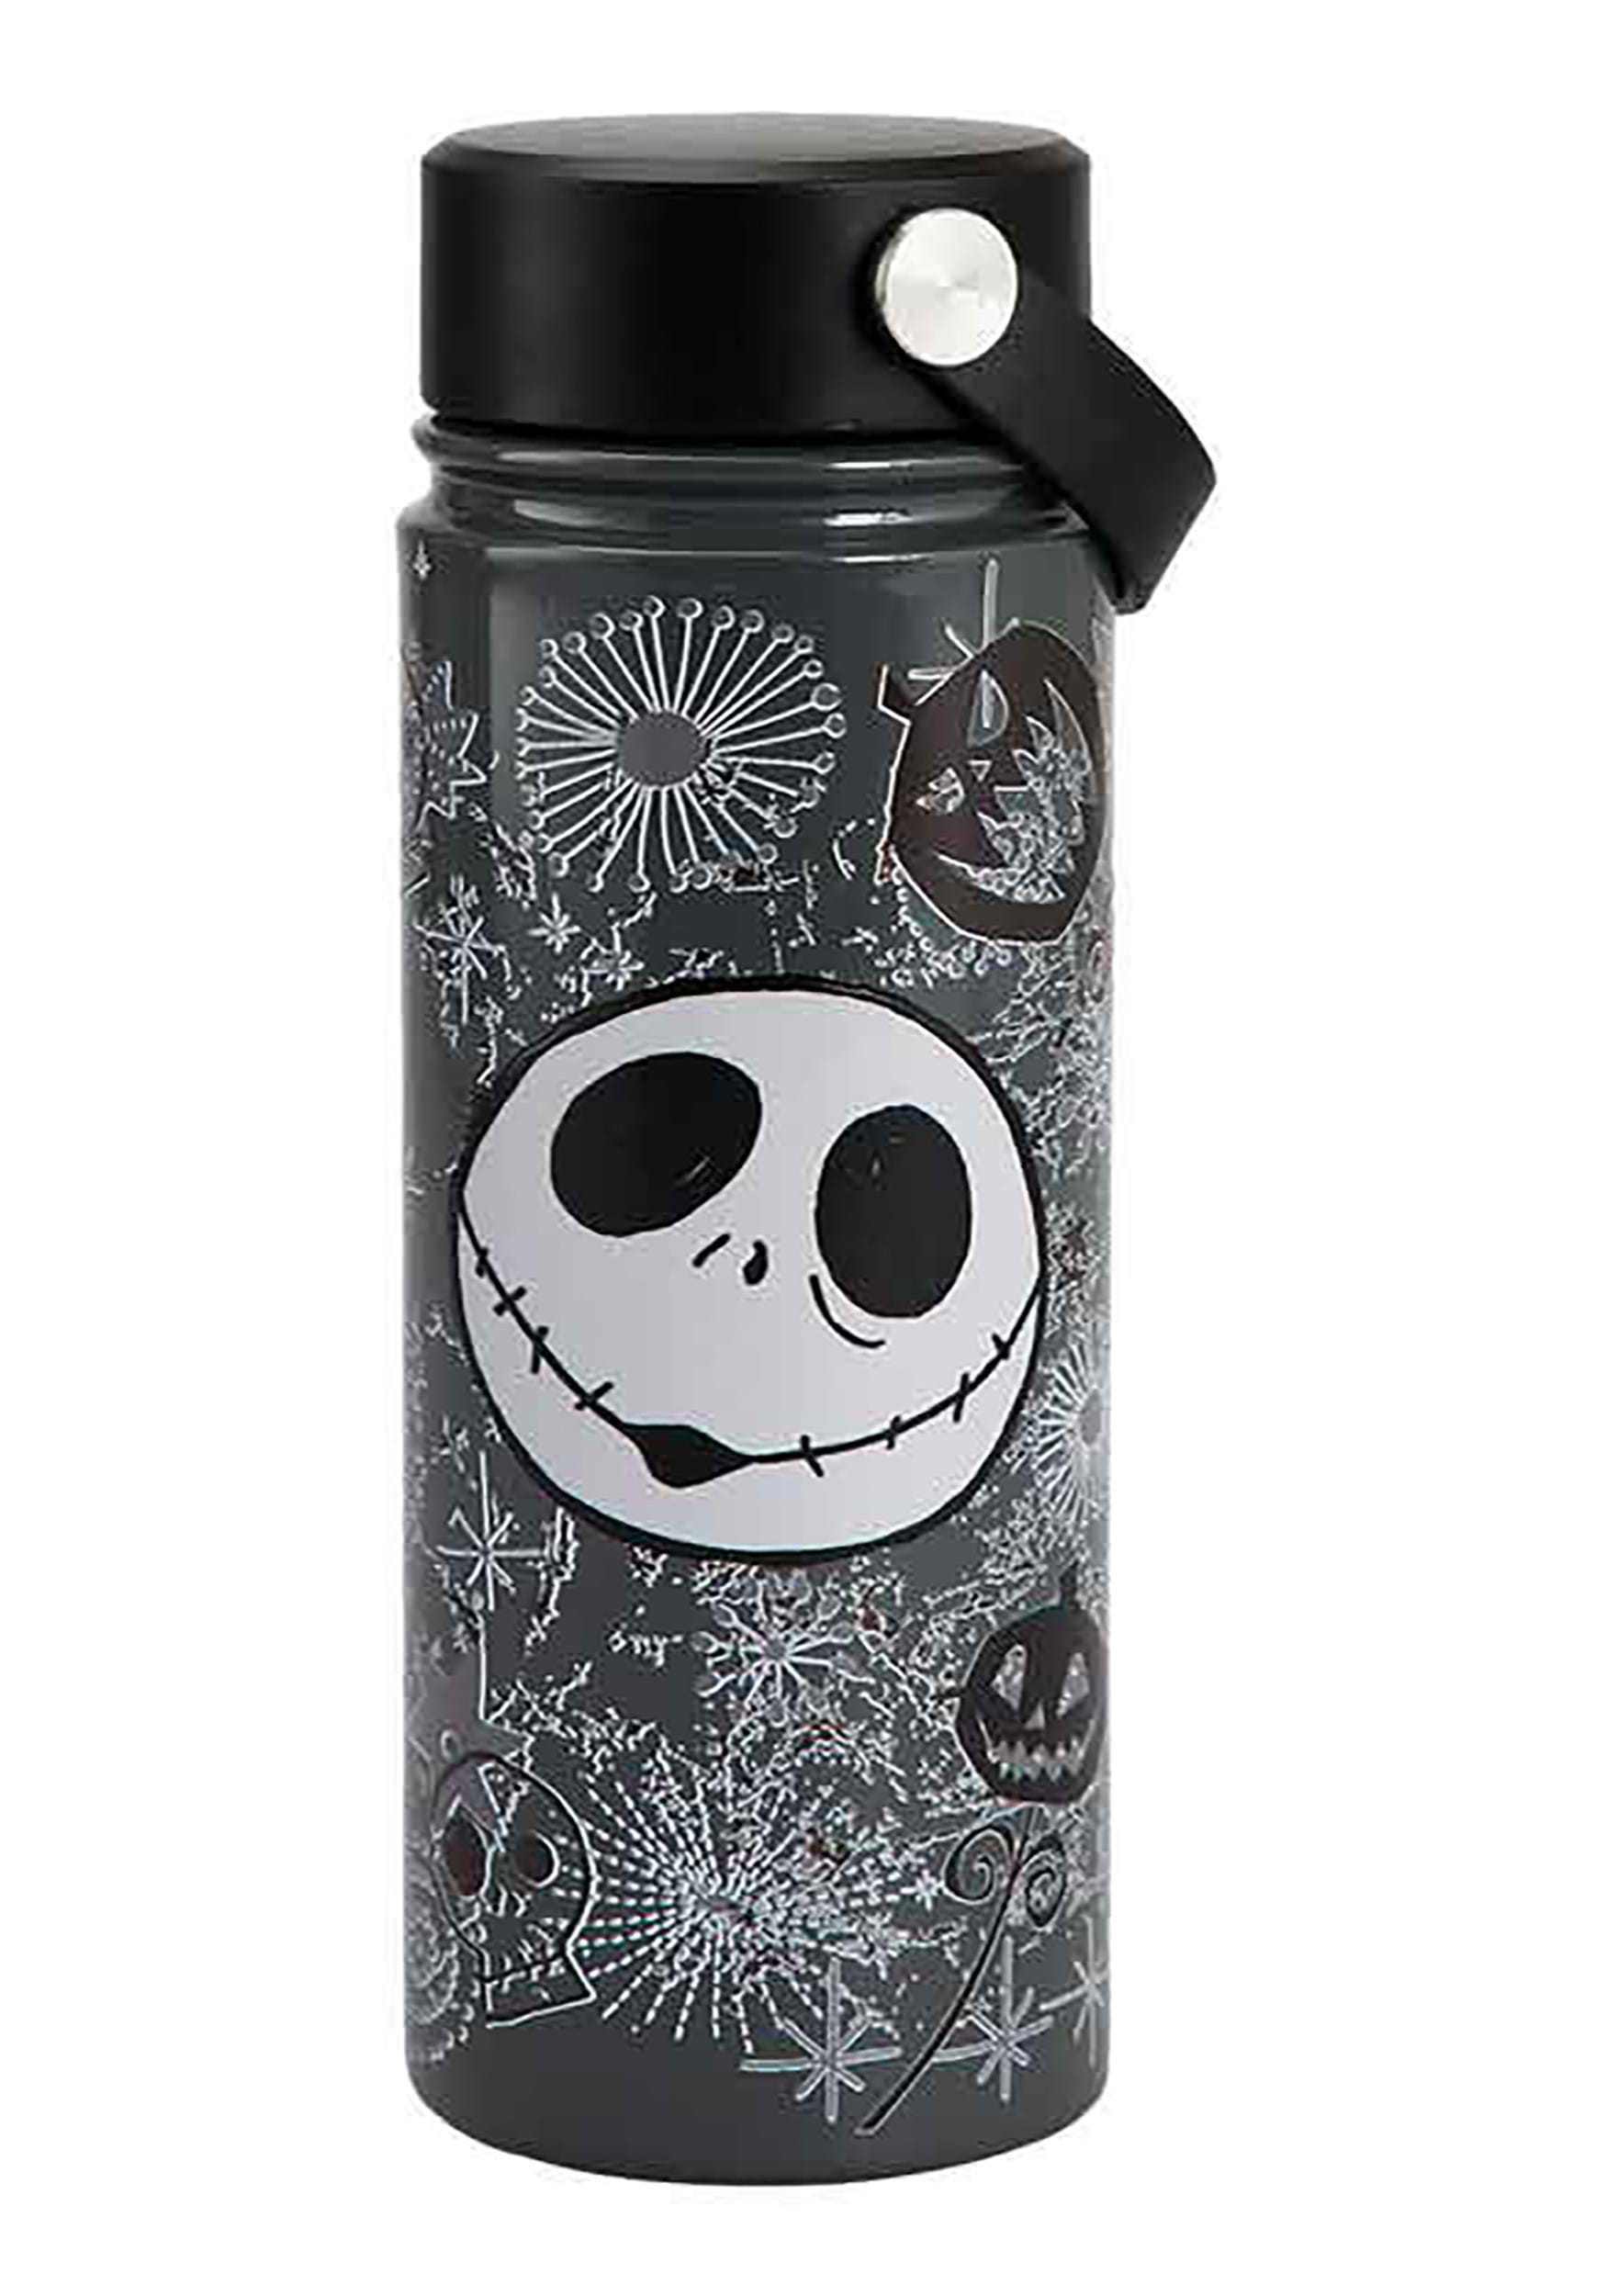 https://images.fun.com/products/79289/2-1-204317/nightmare-before-christmas-jack-17oz-stainless-steel-bottle1.jpg